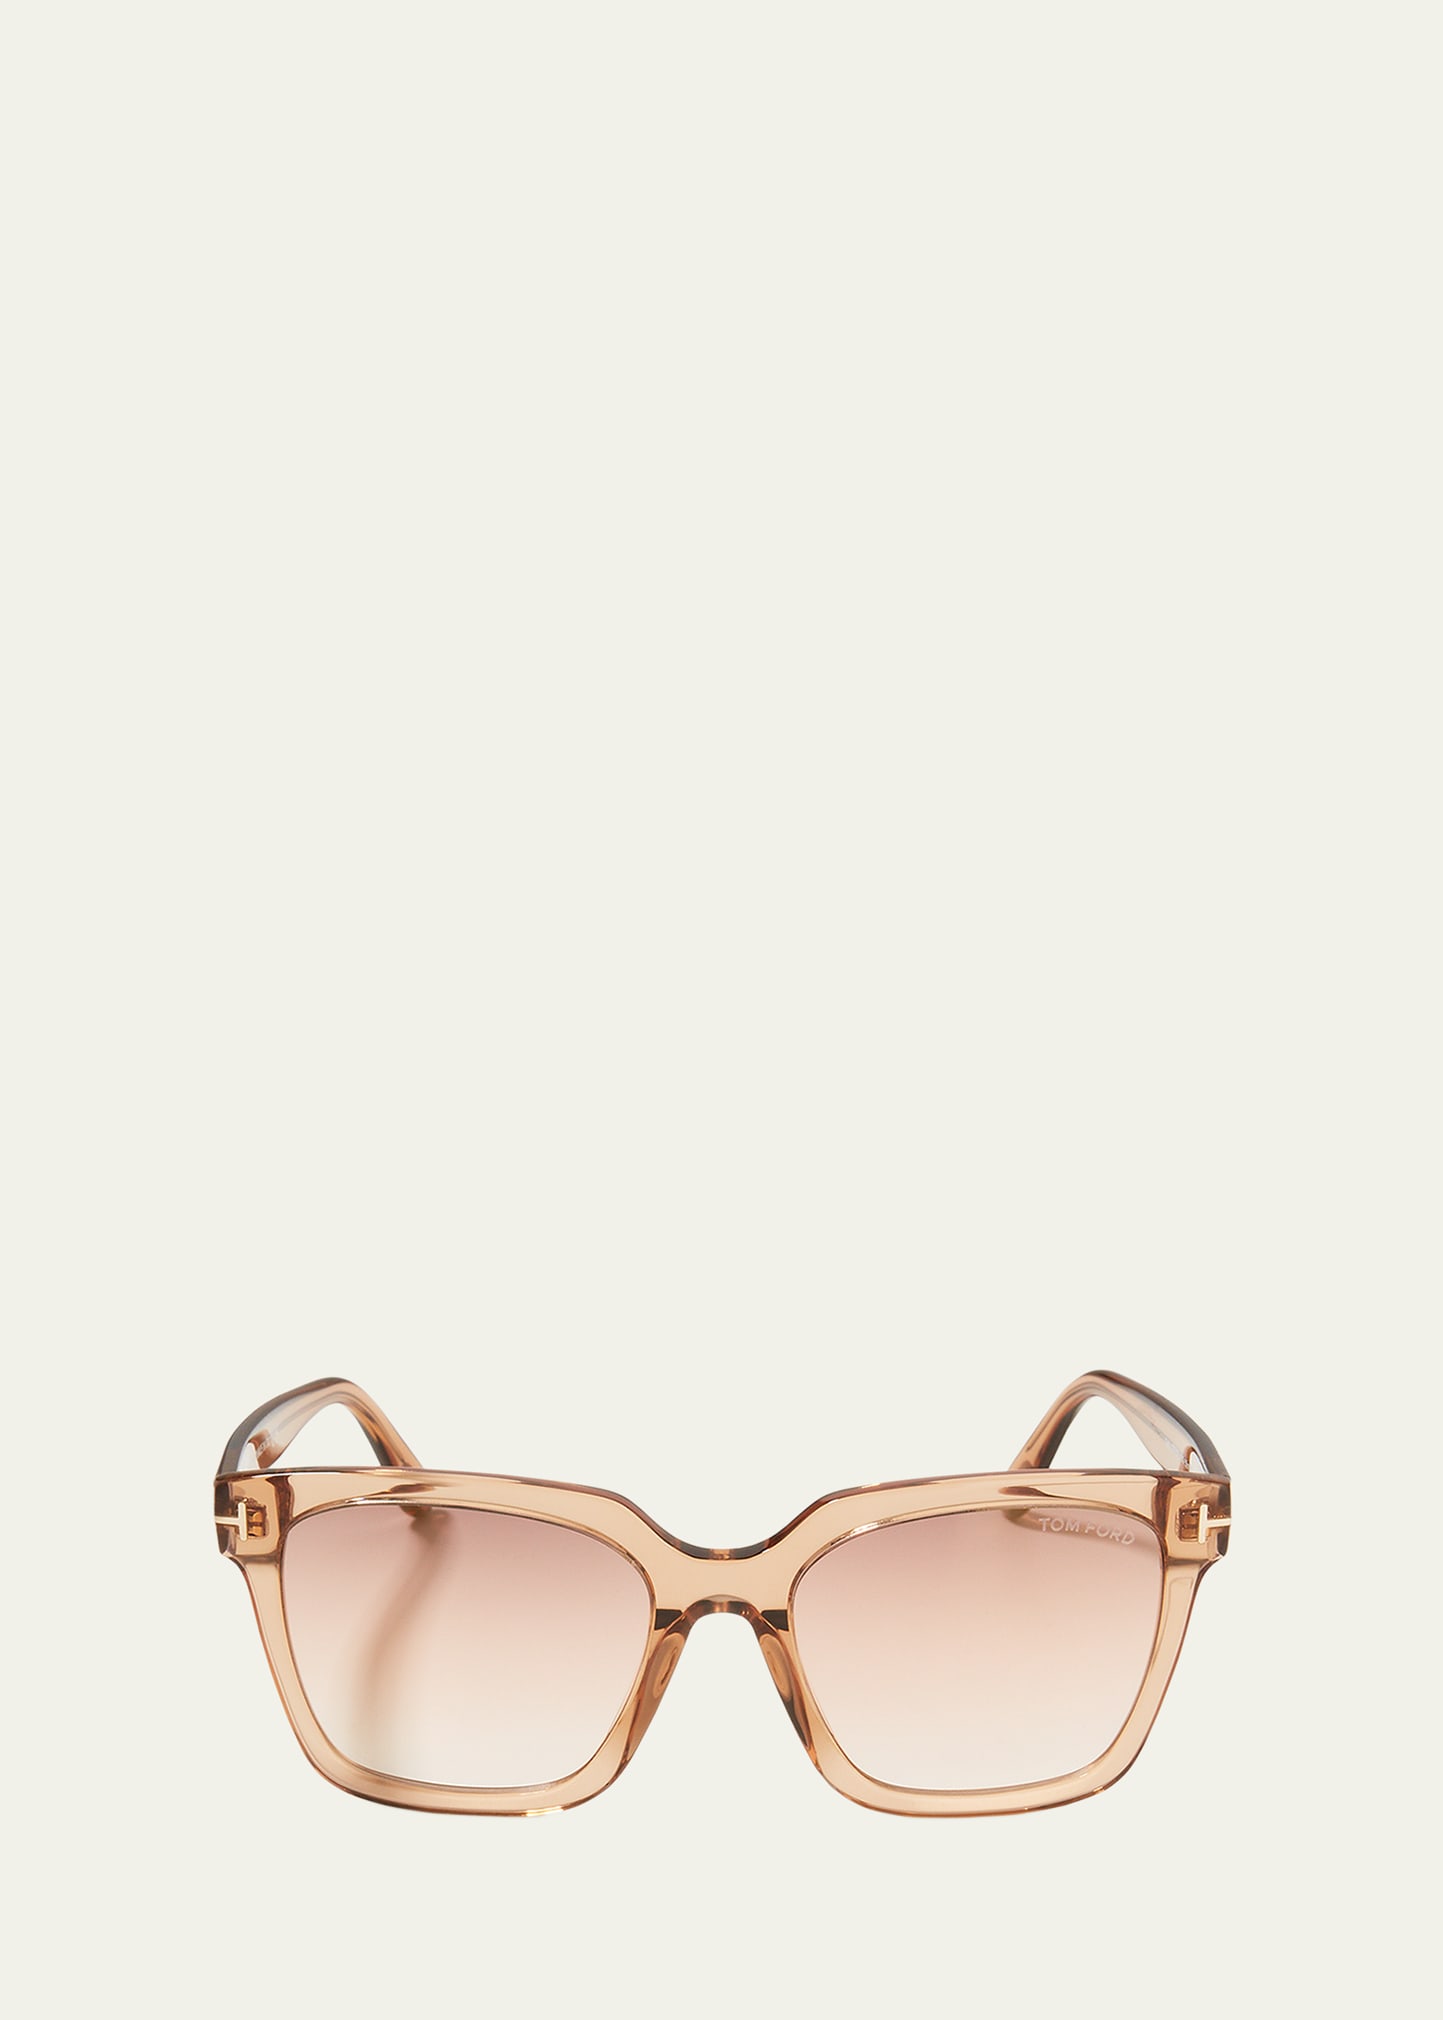 TOM FORD SELBY SQUARE PLASTIC SUNGLASSES